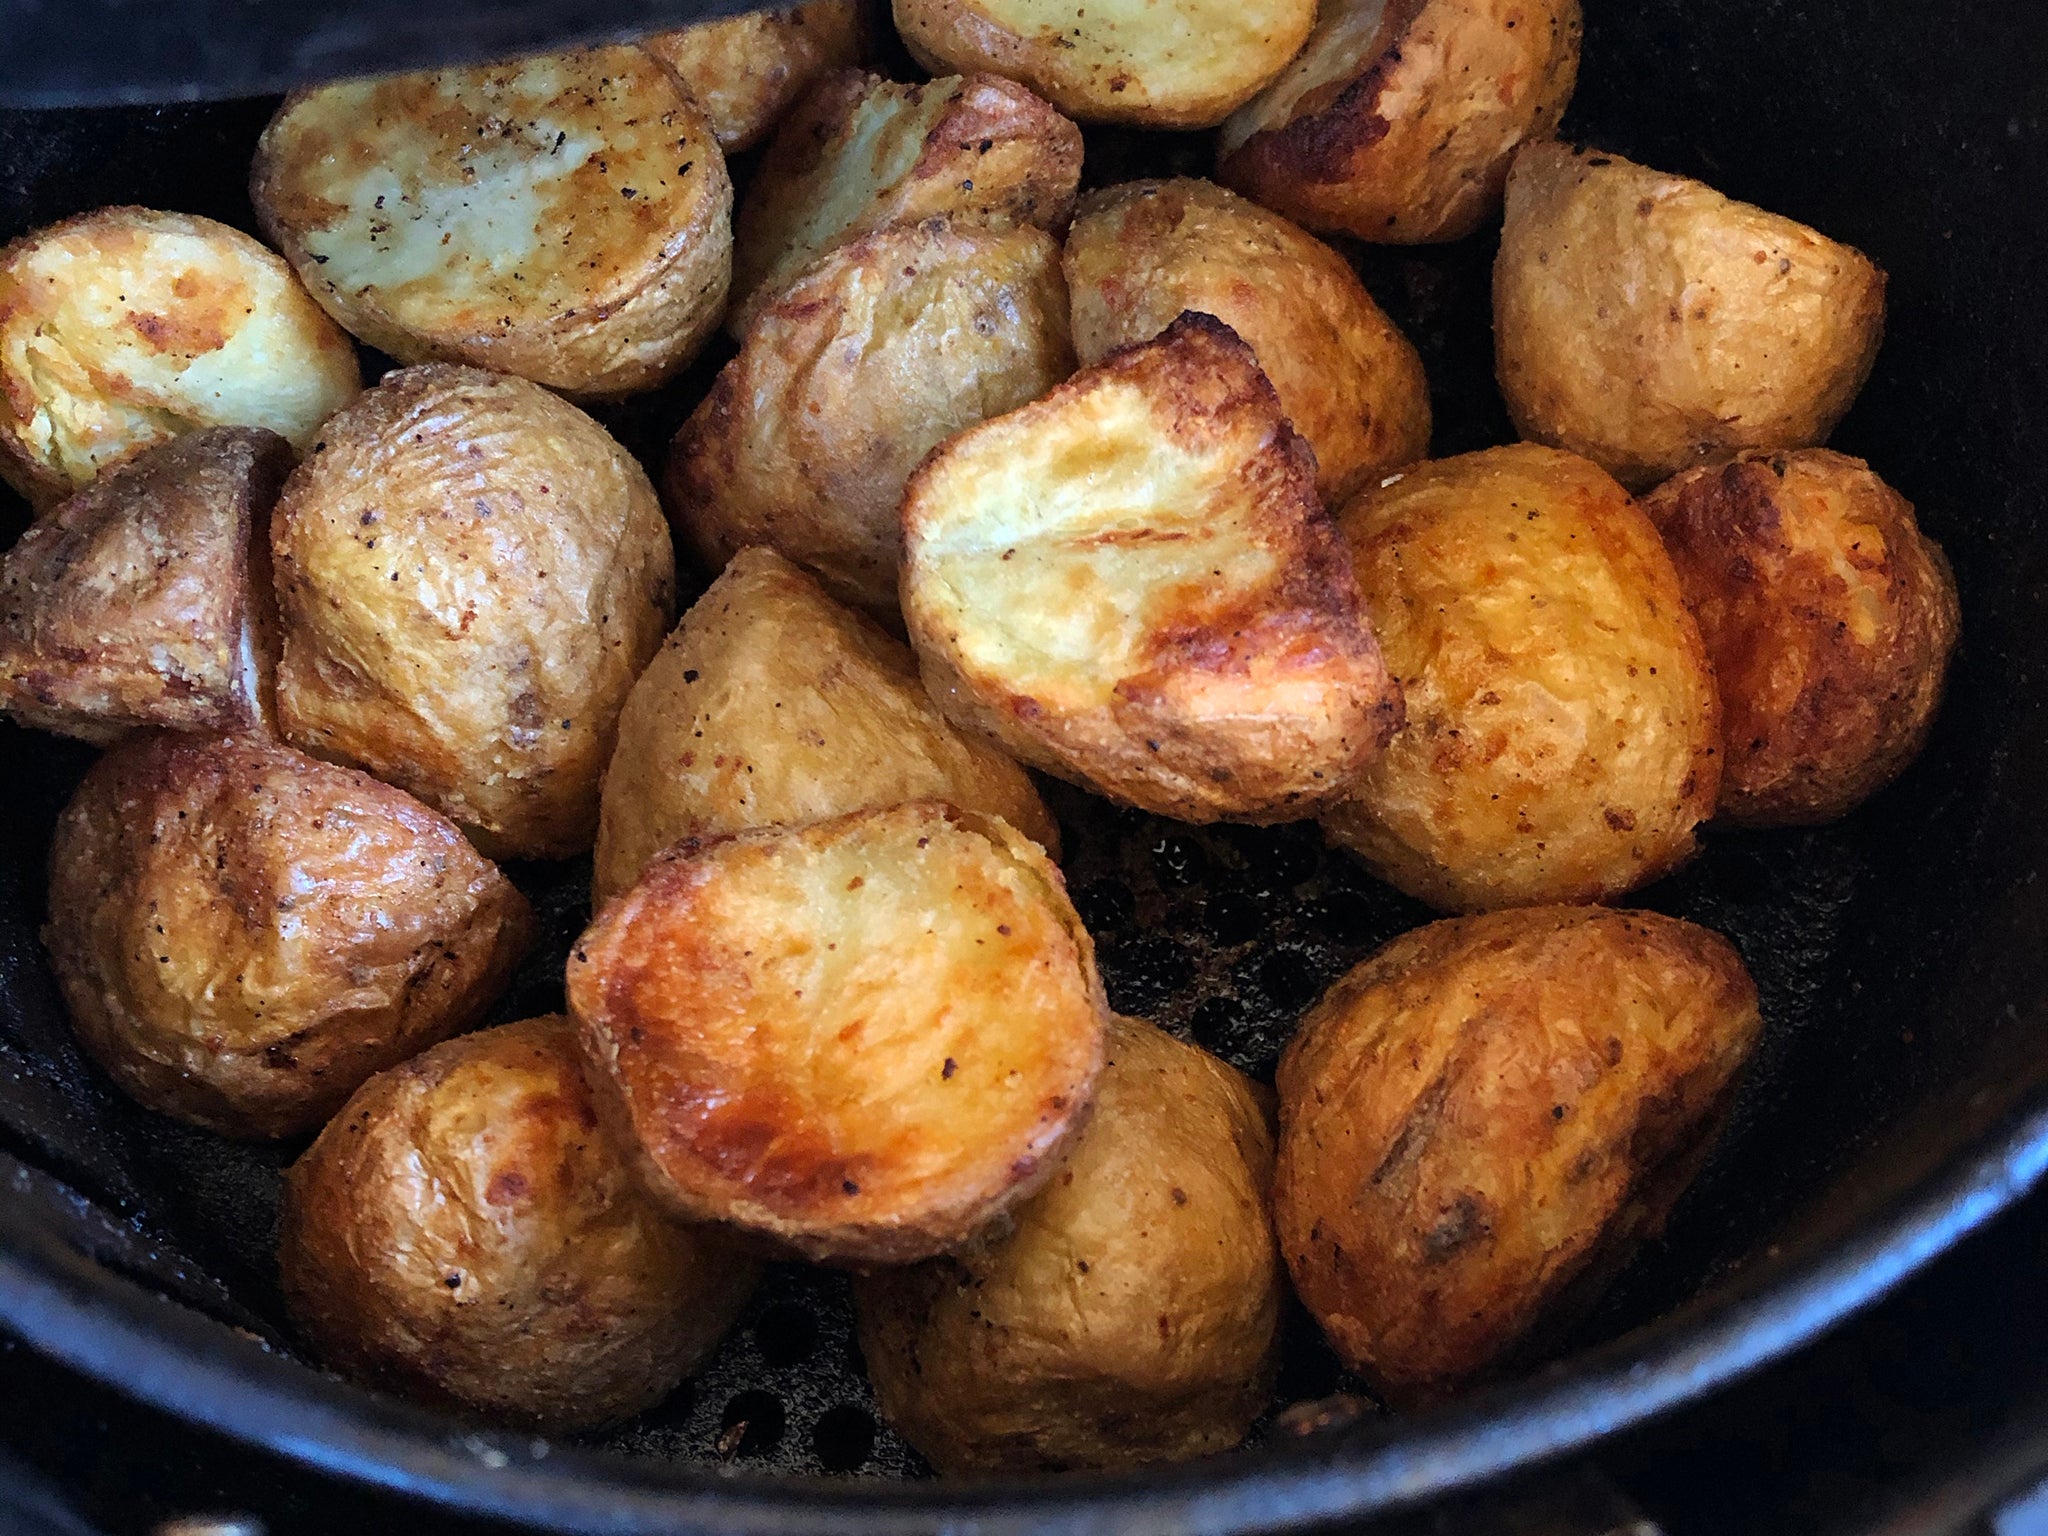 Crispy roasted potatoes seasoned with rosemary and garlic, fresh out of the air fryer